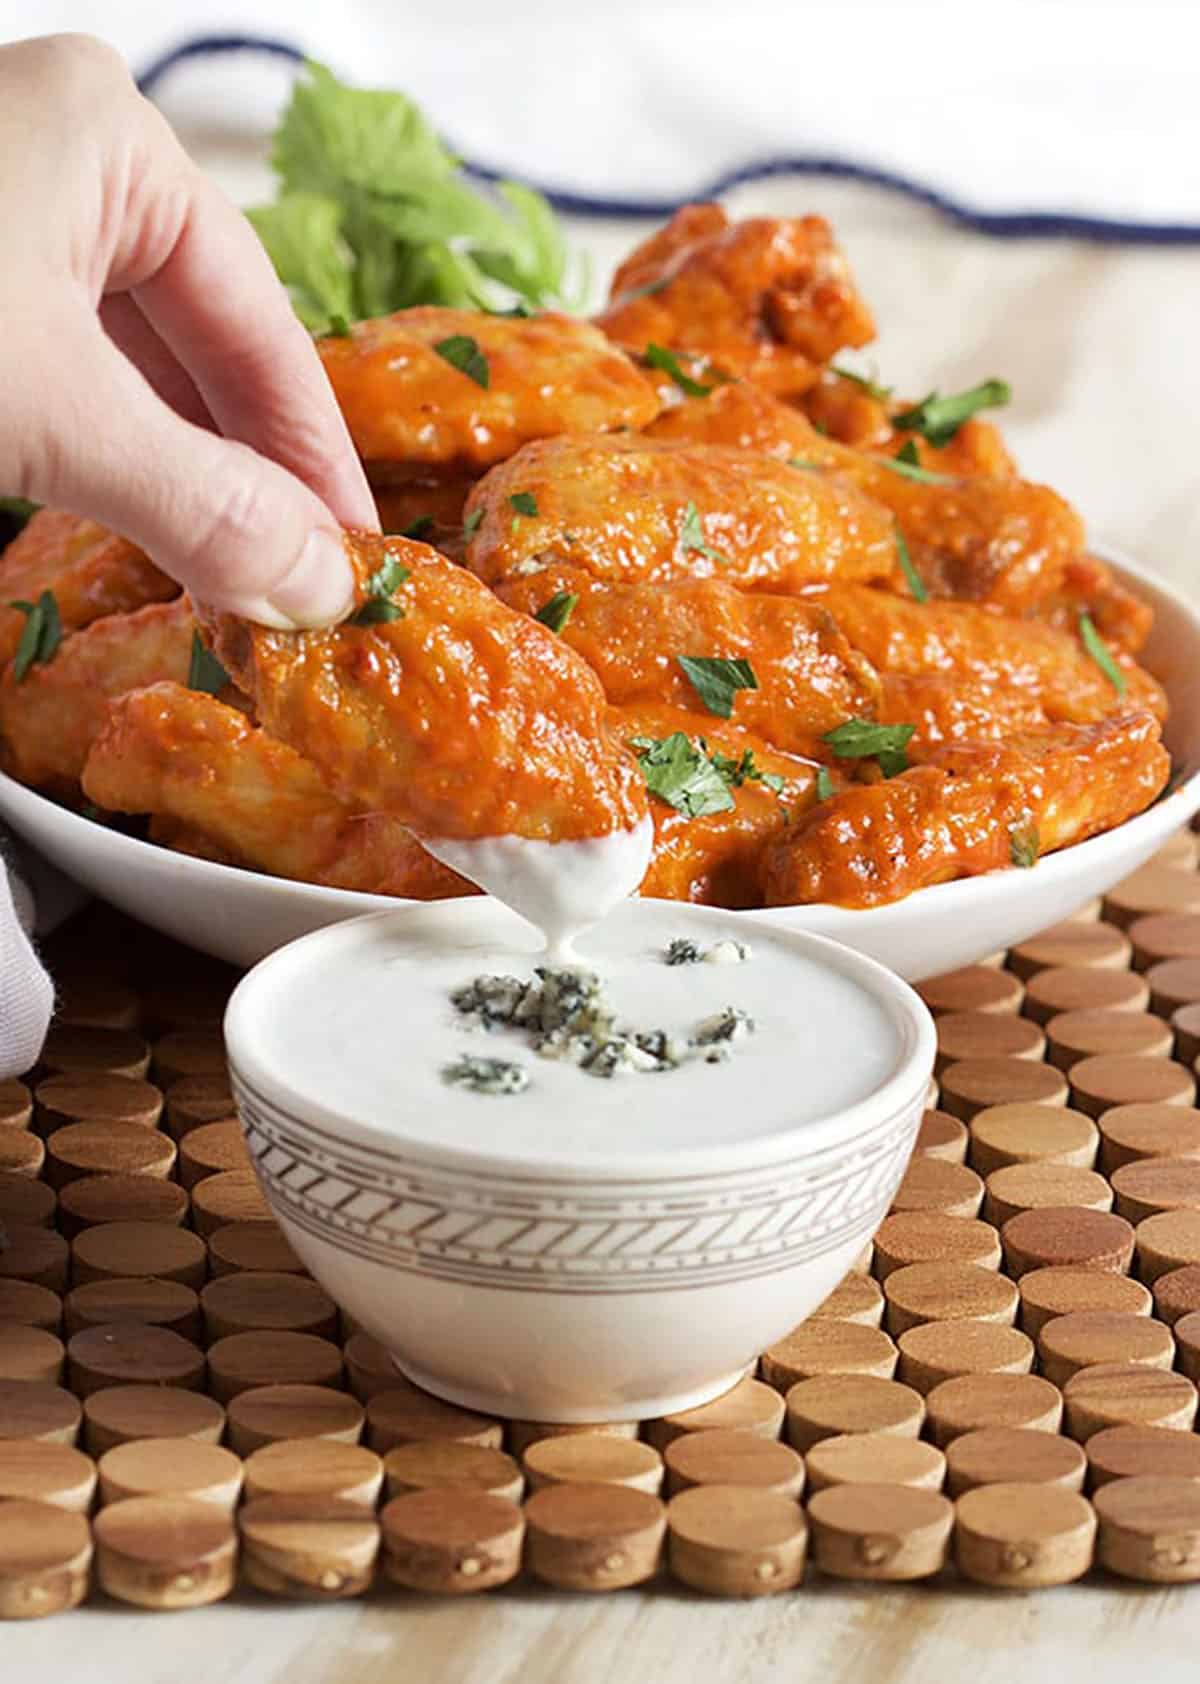 Buffalo chicken wing being dipped into a white bowl of blue cheese dressing.